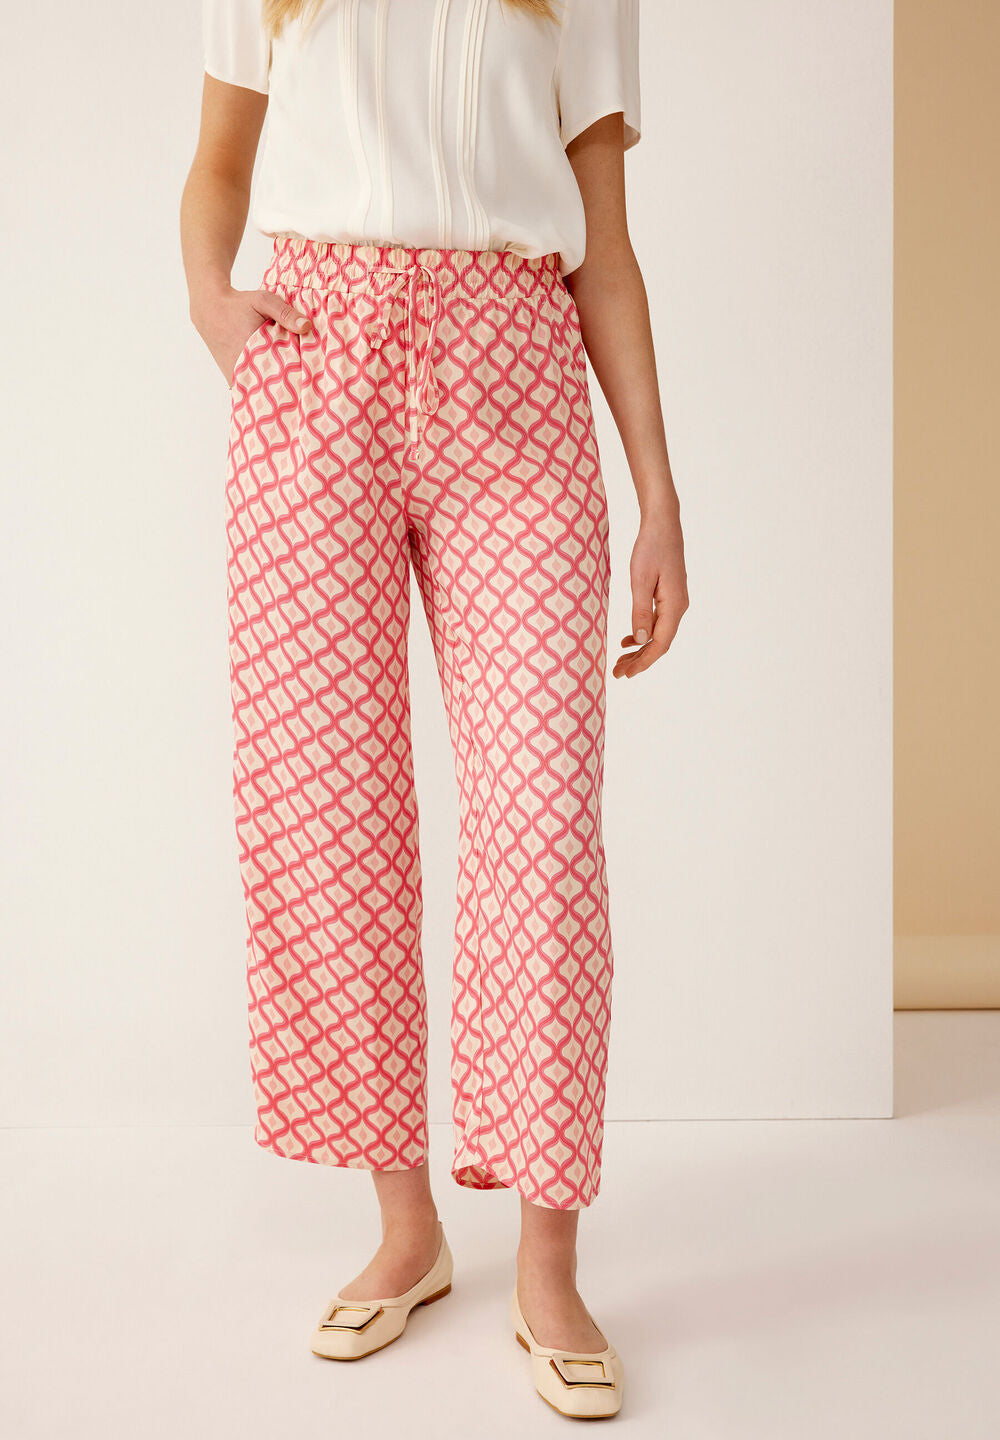 MORE & MORE <BR>
Print trousers <BR>
Peach <BR>